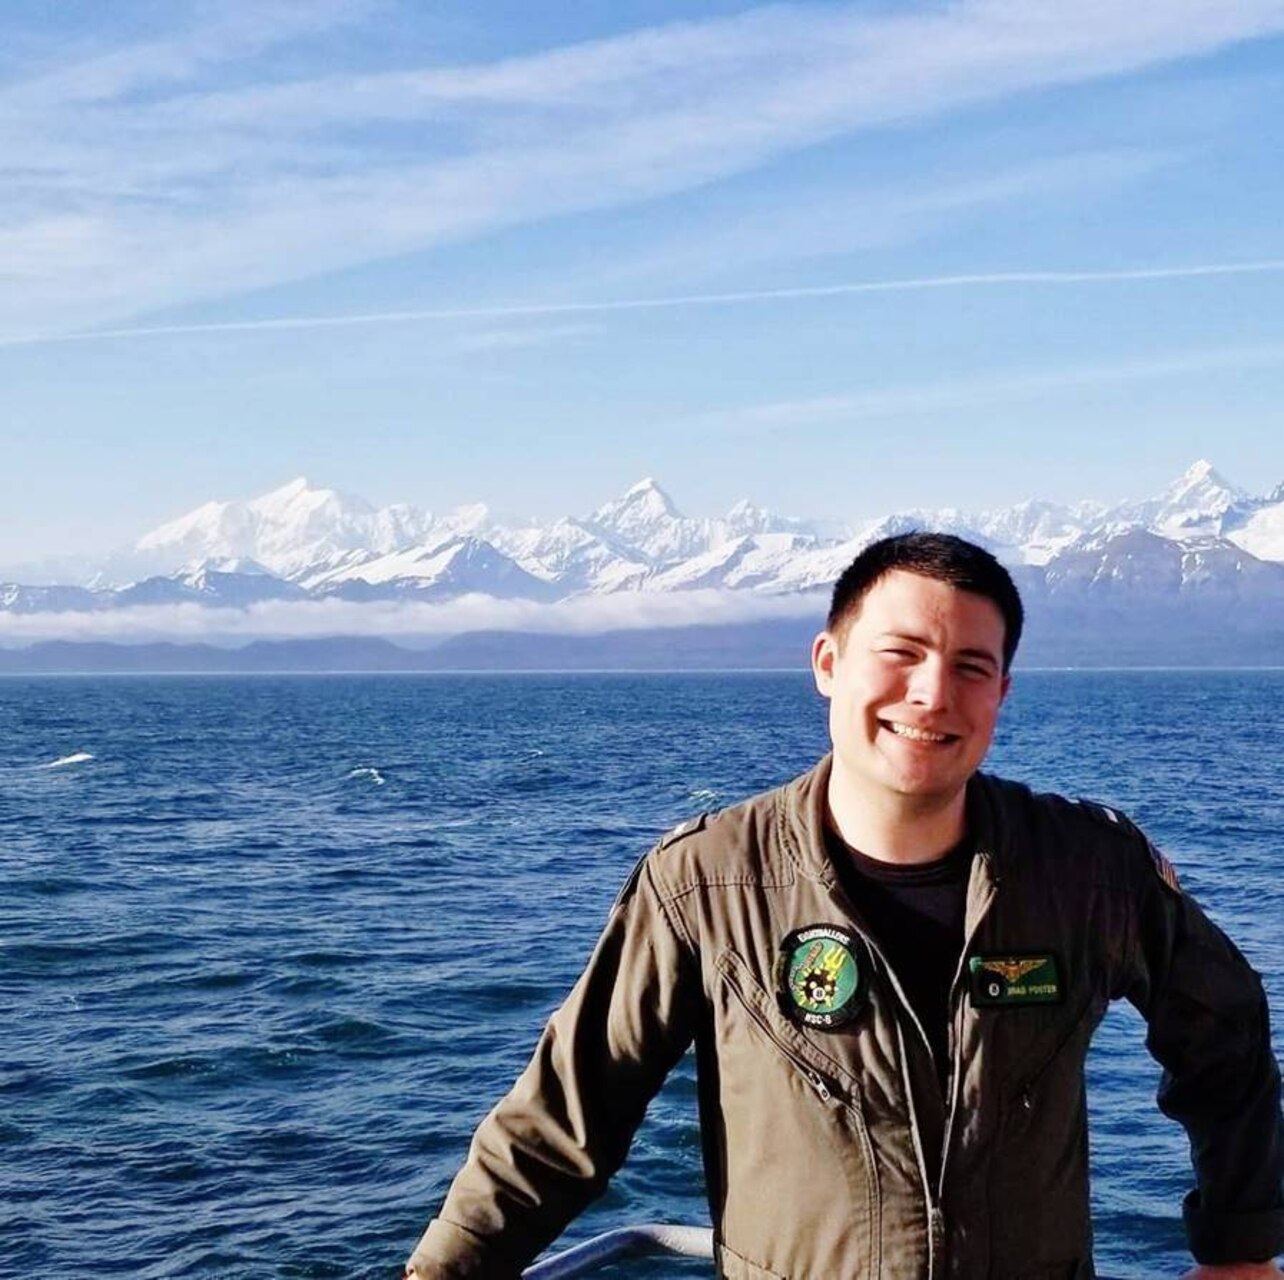 FILE PHOTO of Lt. Bradley A. Foster, 29, a pilot from Oakhurst, California. Foster was one of five Sailors killed when an MH-60S Seahawk helicopter, assigned to Helicopter Sea Combat Squadron (HSC) 8, crashed approximately 60 nautical miles off the coast of San Diego, Aug. 31.